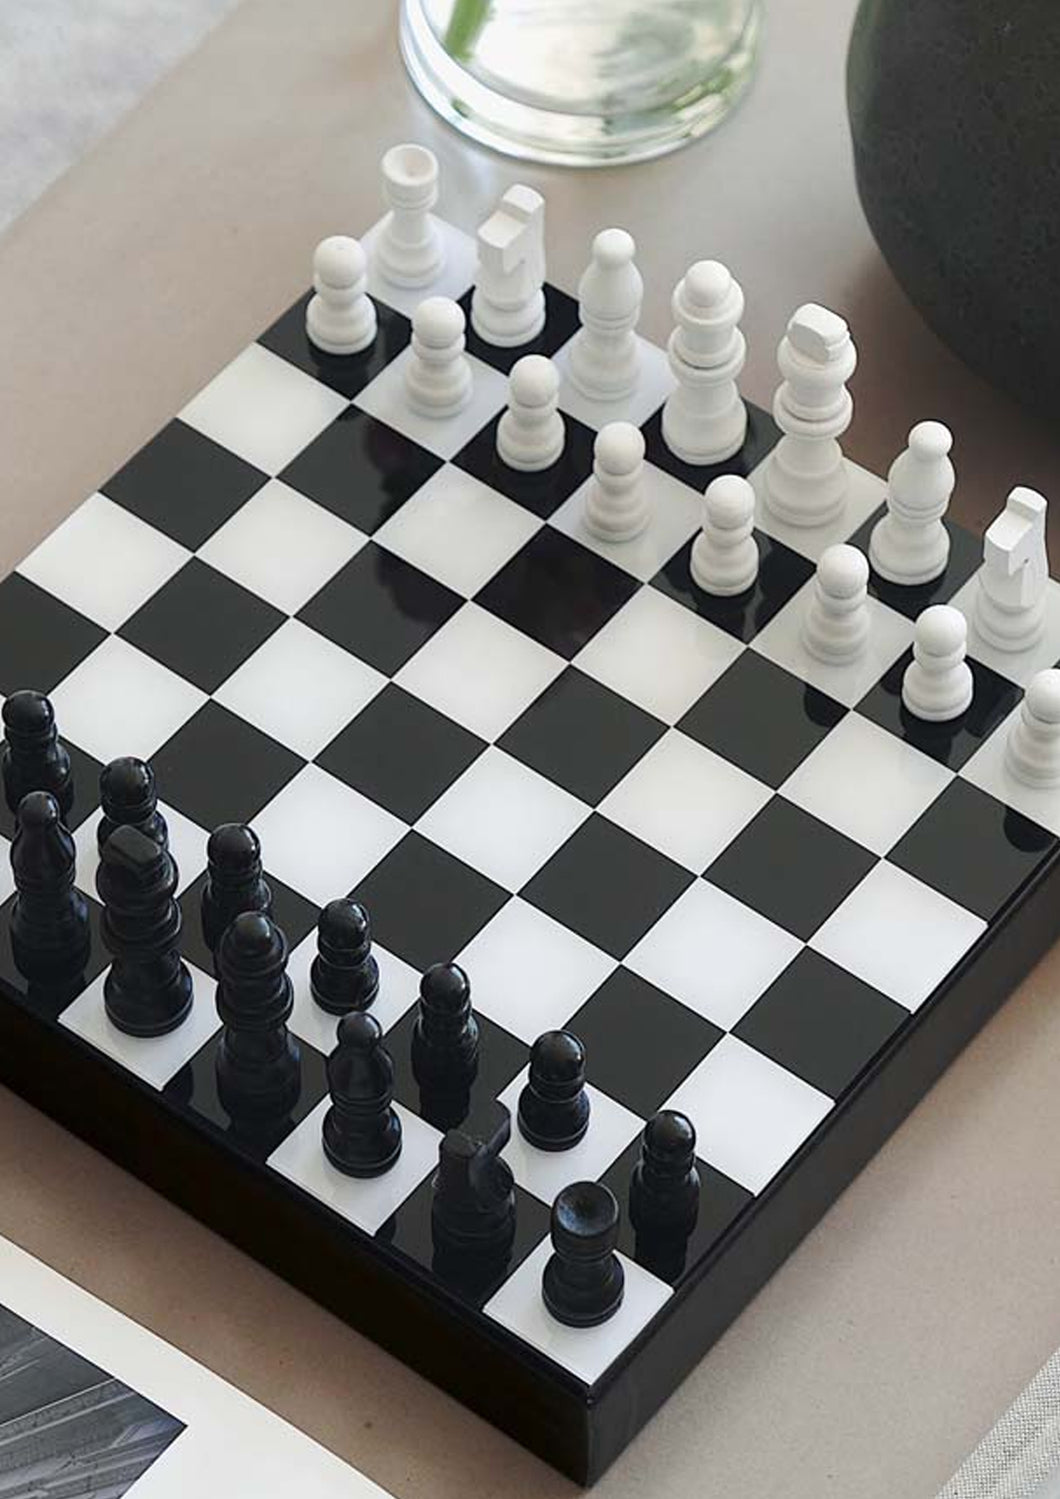 Game, The Art of Chess